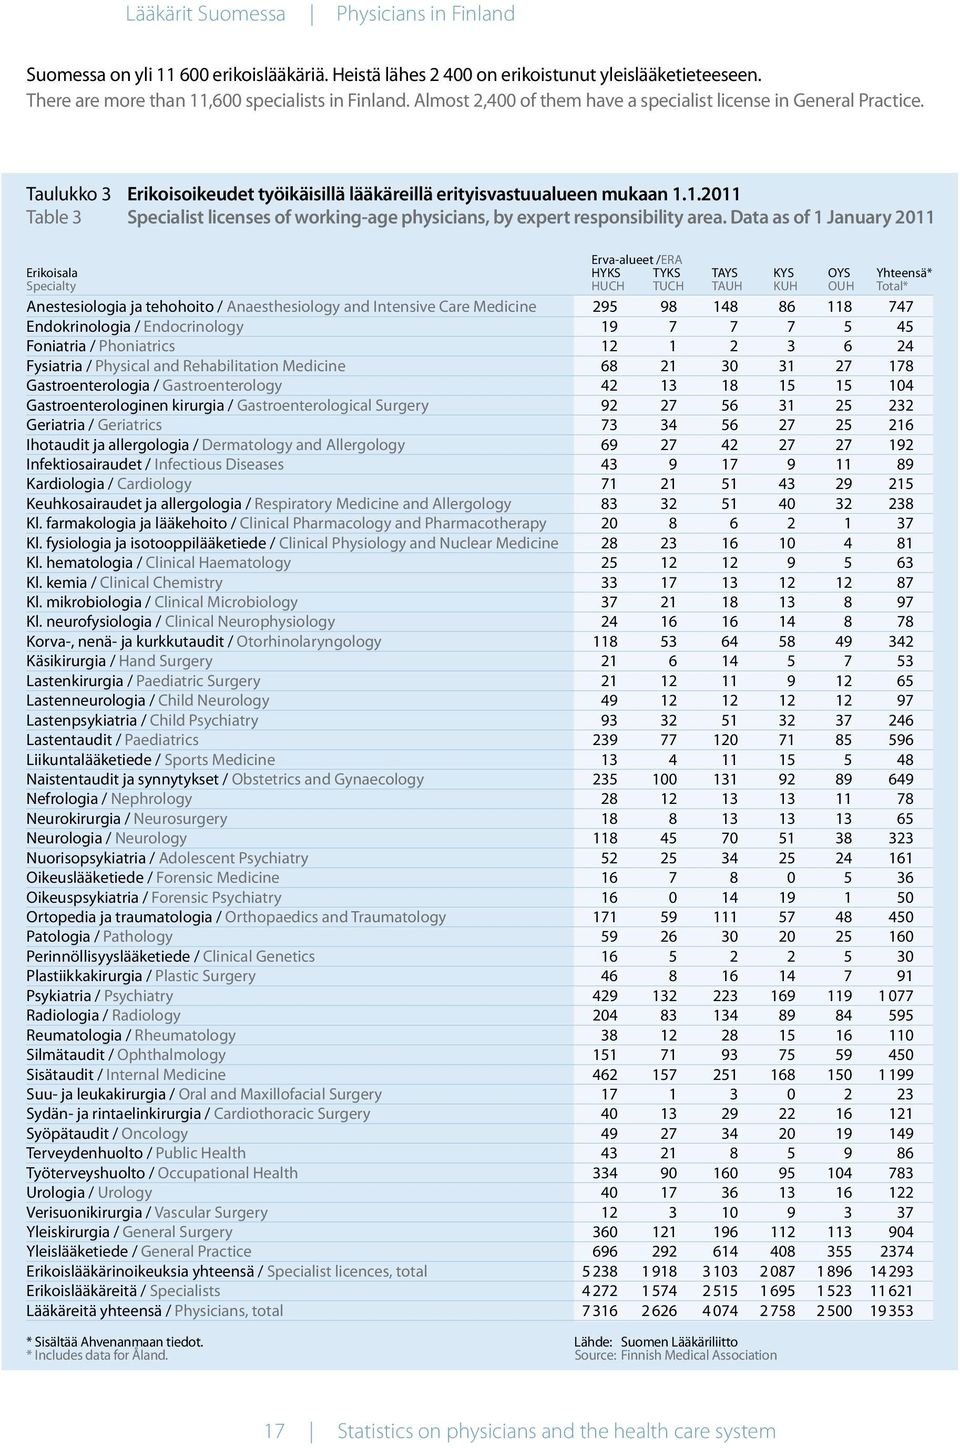 1.2011 Table 3 Specialist licenses of working-age physicians, by expert responsibility area.